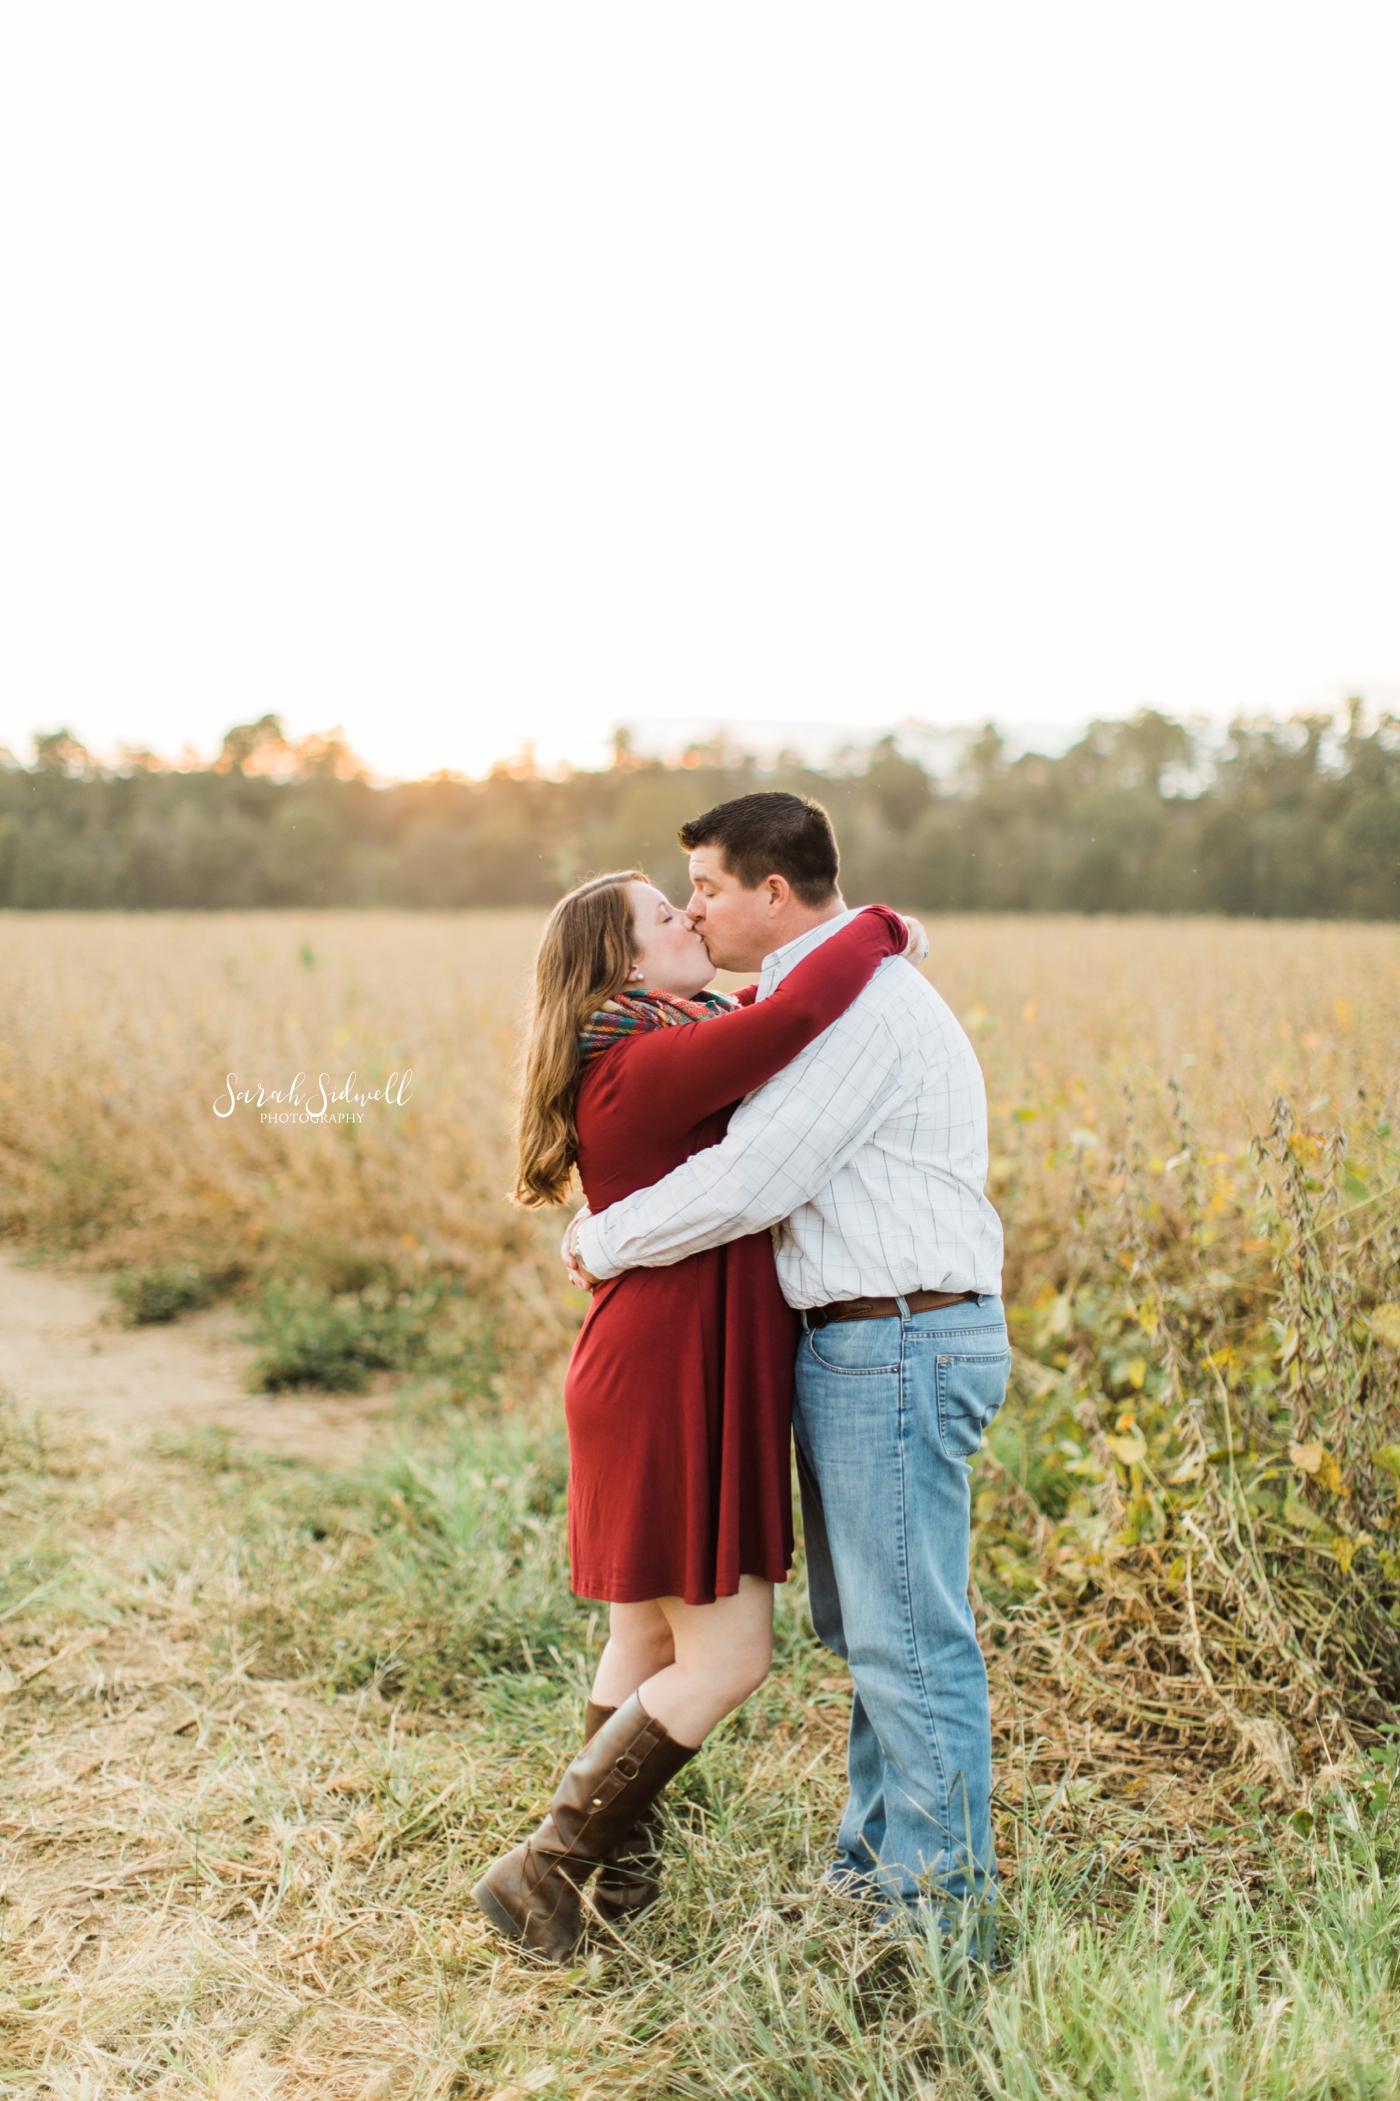 An engaged couple kisses each other. | Nashville Engagement Photography